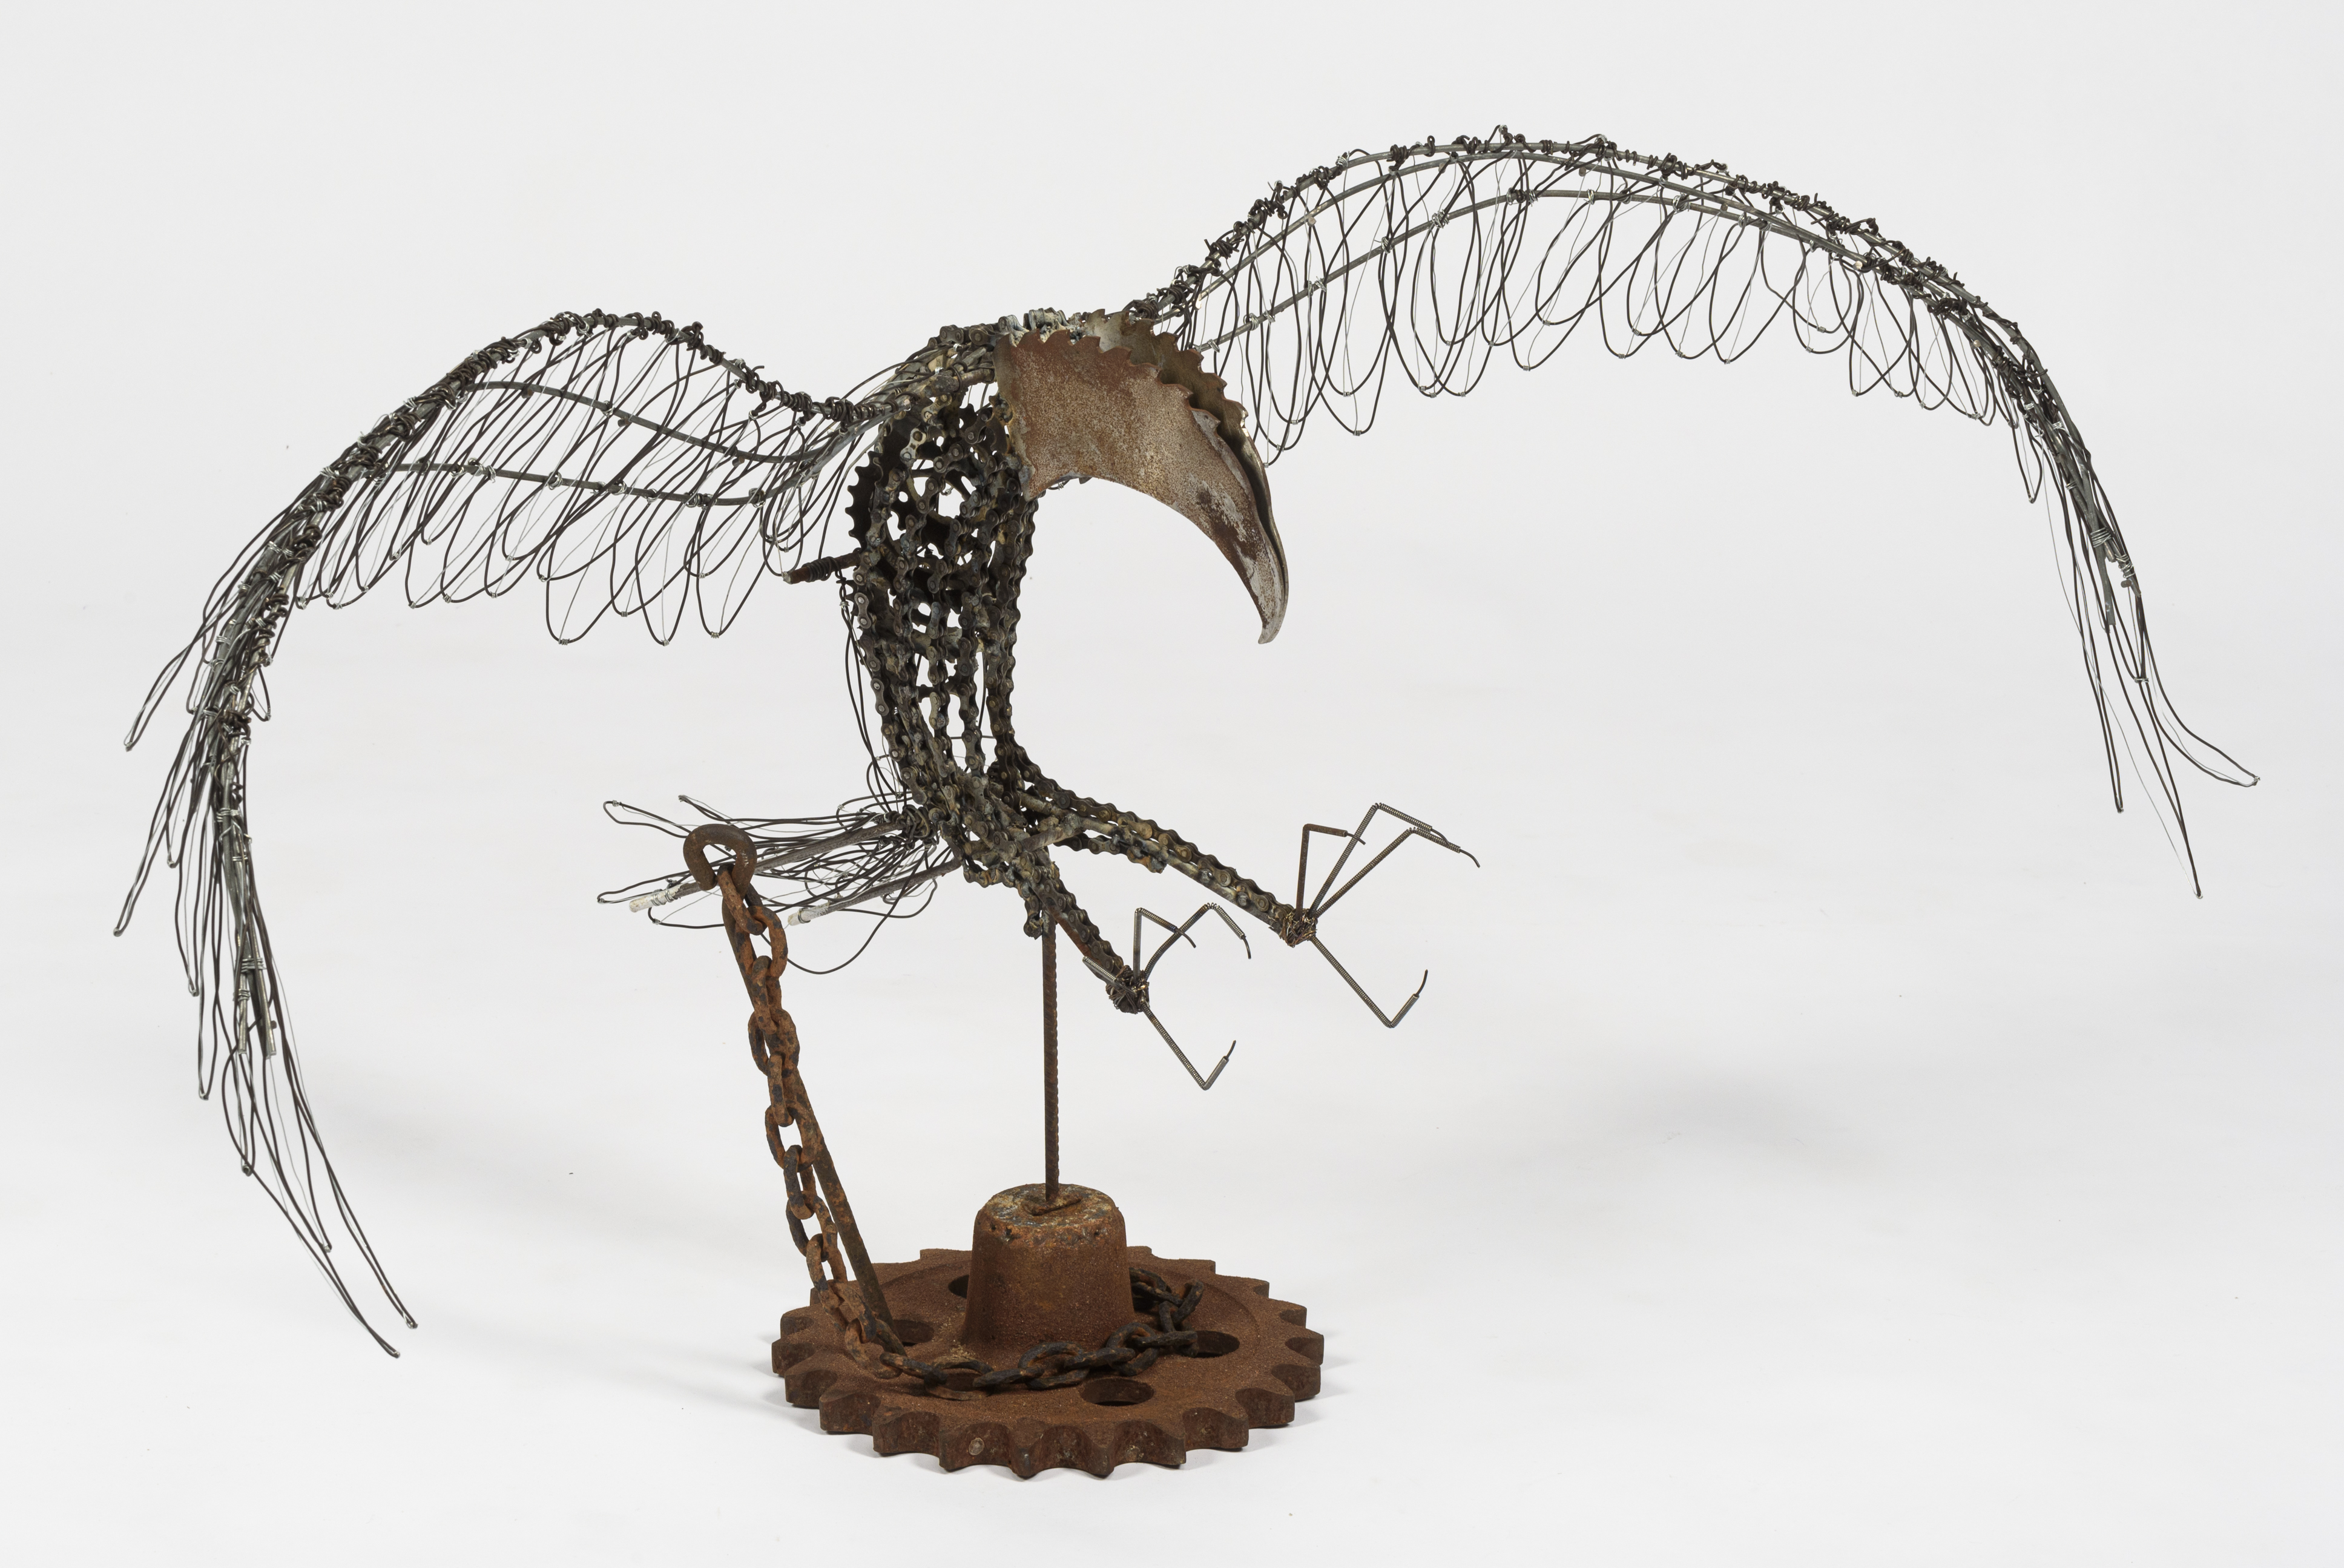 A sculpture of a bird chained to a tether made from recycled wire and metals.